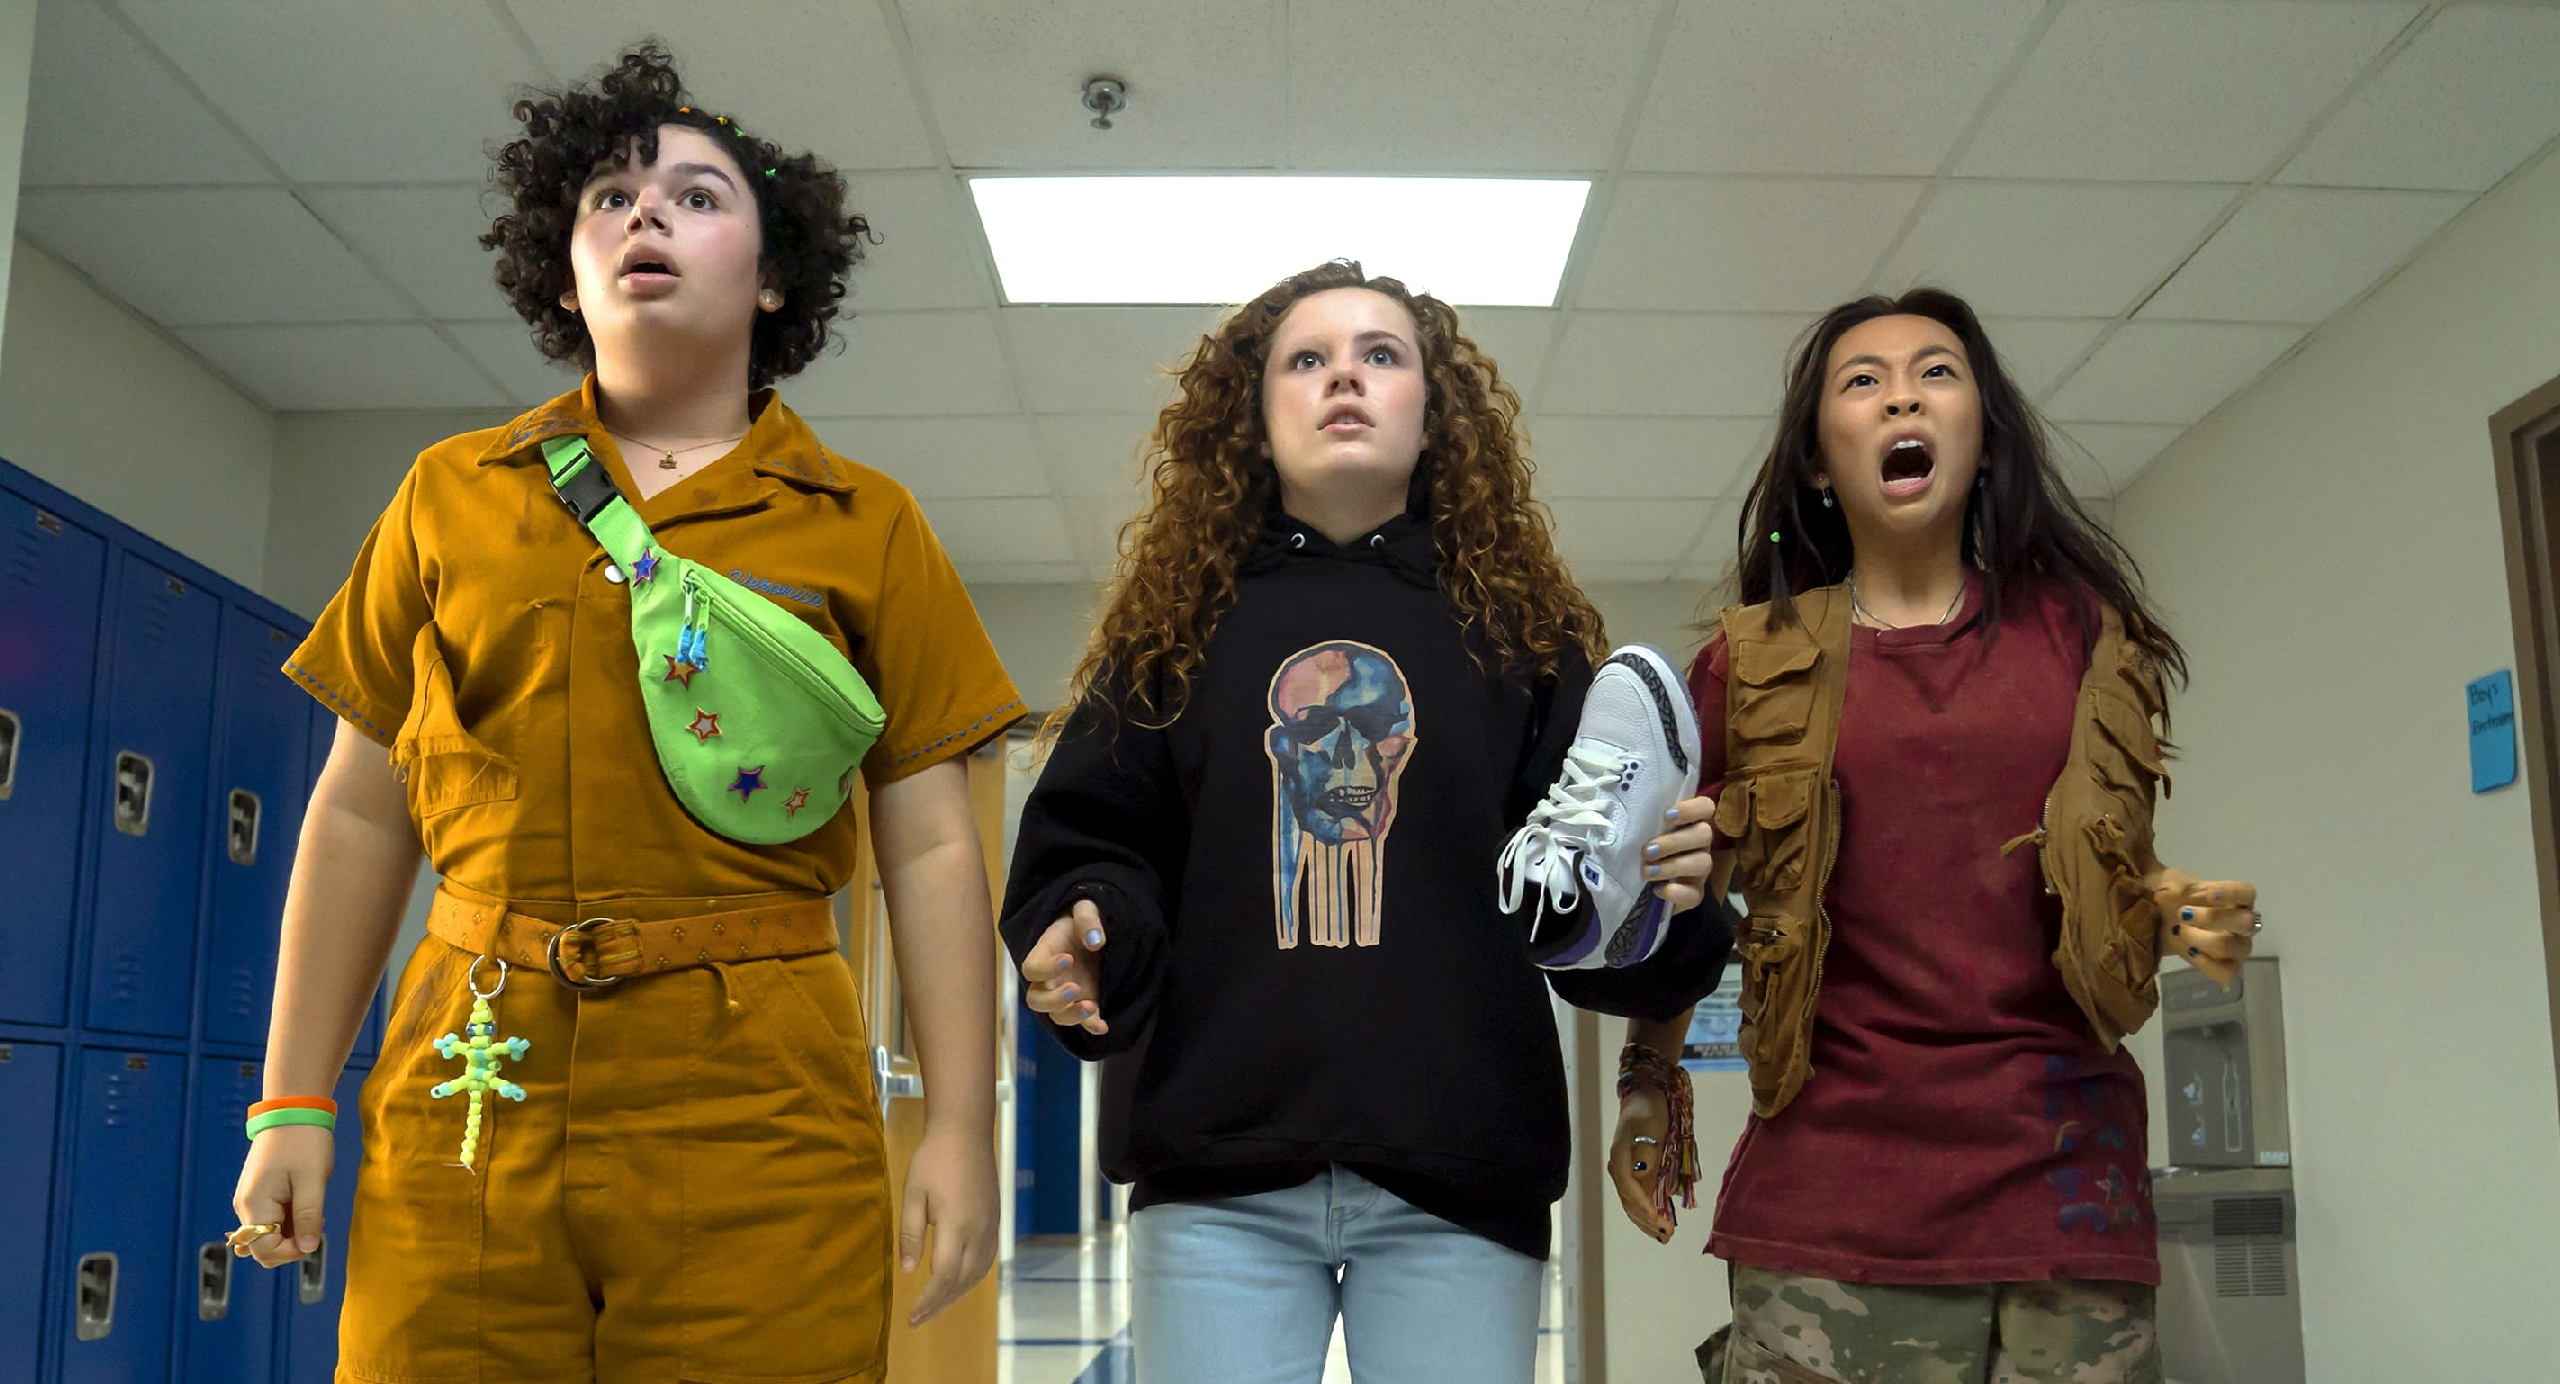 The Slumber Party Review Lighthearted Fun For Tweens The Movie Blog